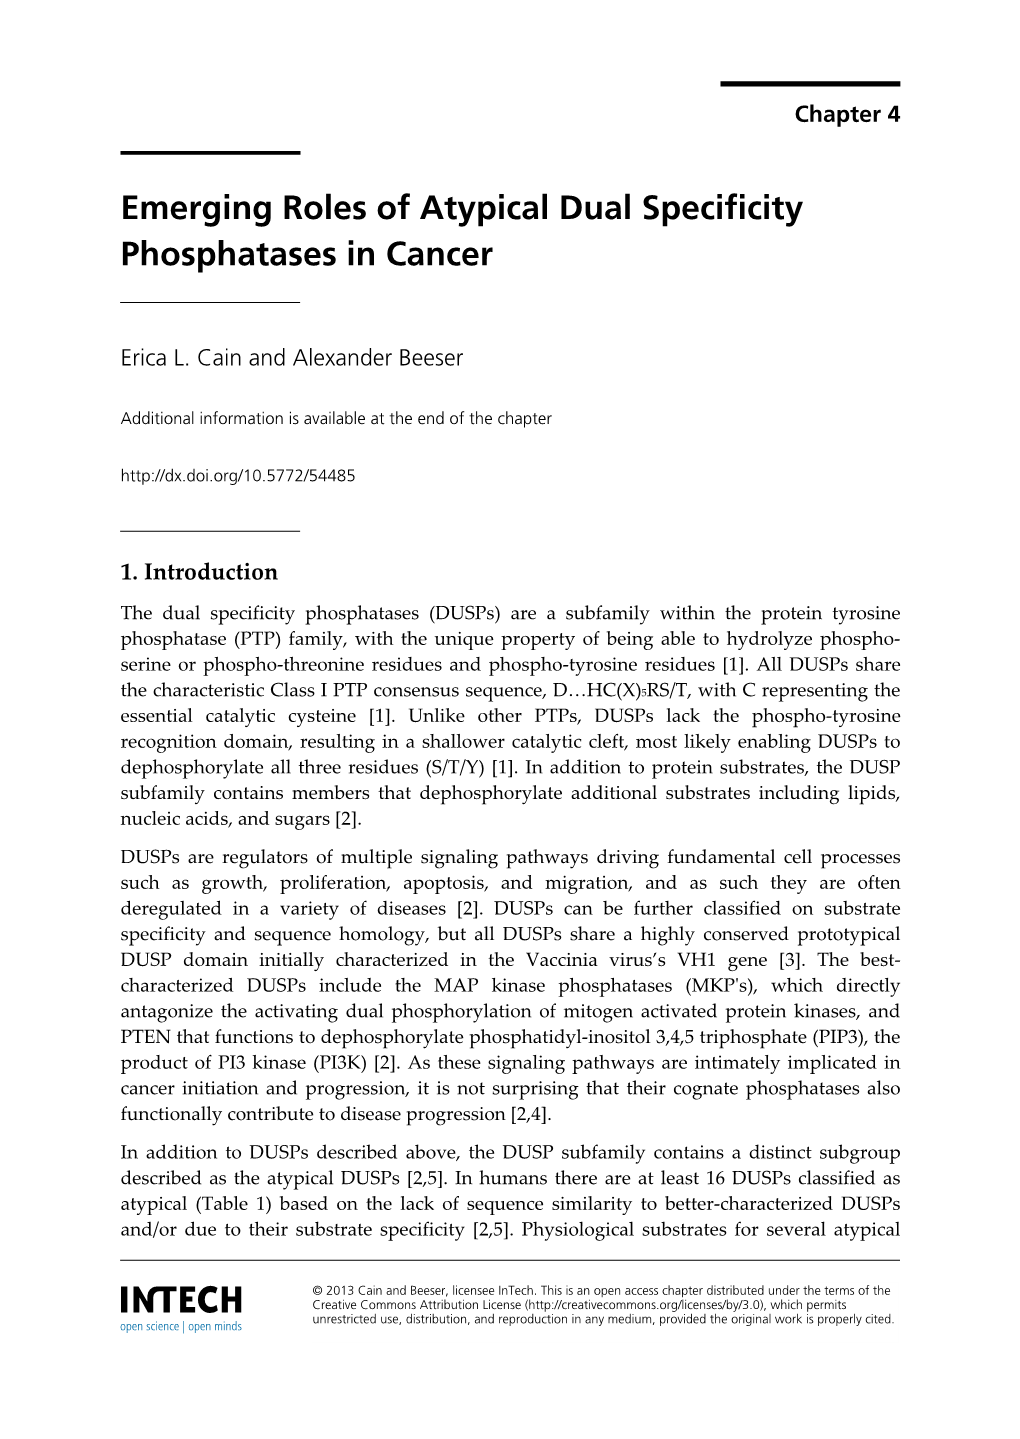 Emerging Roles of Atypical Dual Specificity Phosphatases in Cancer